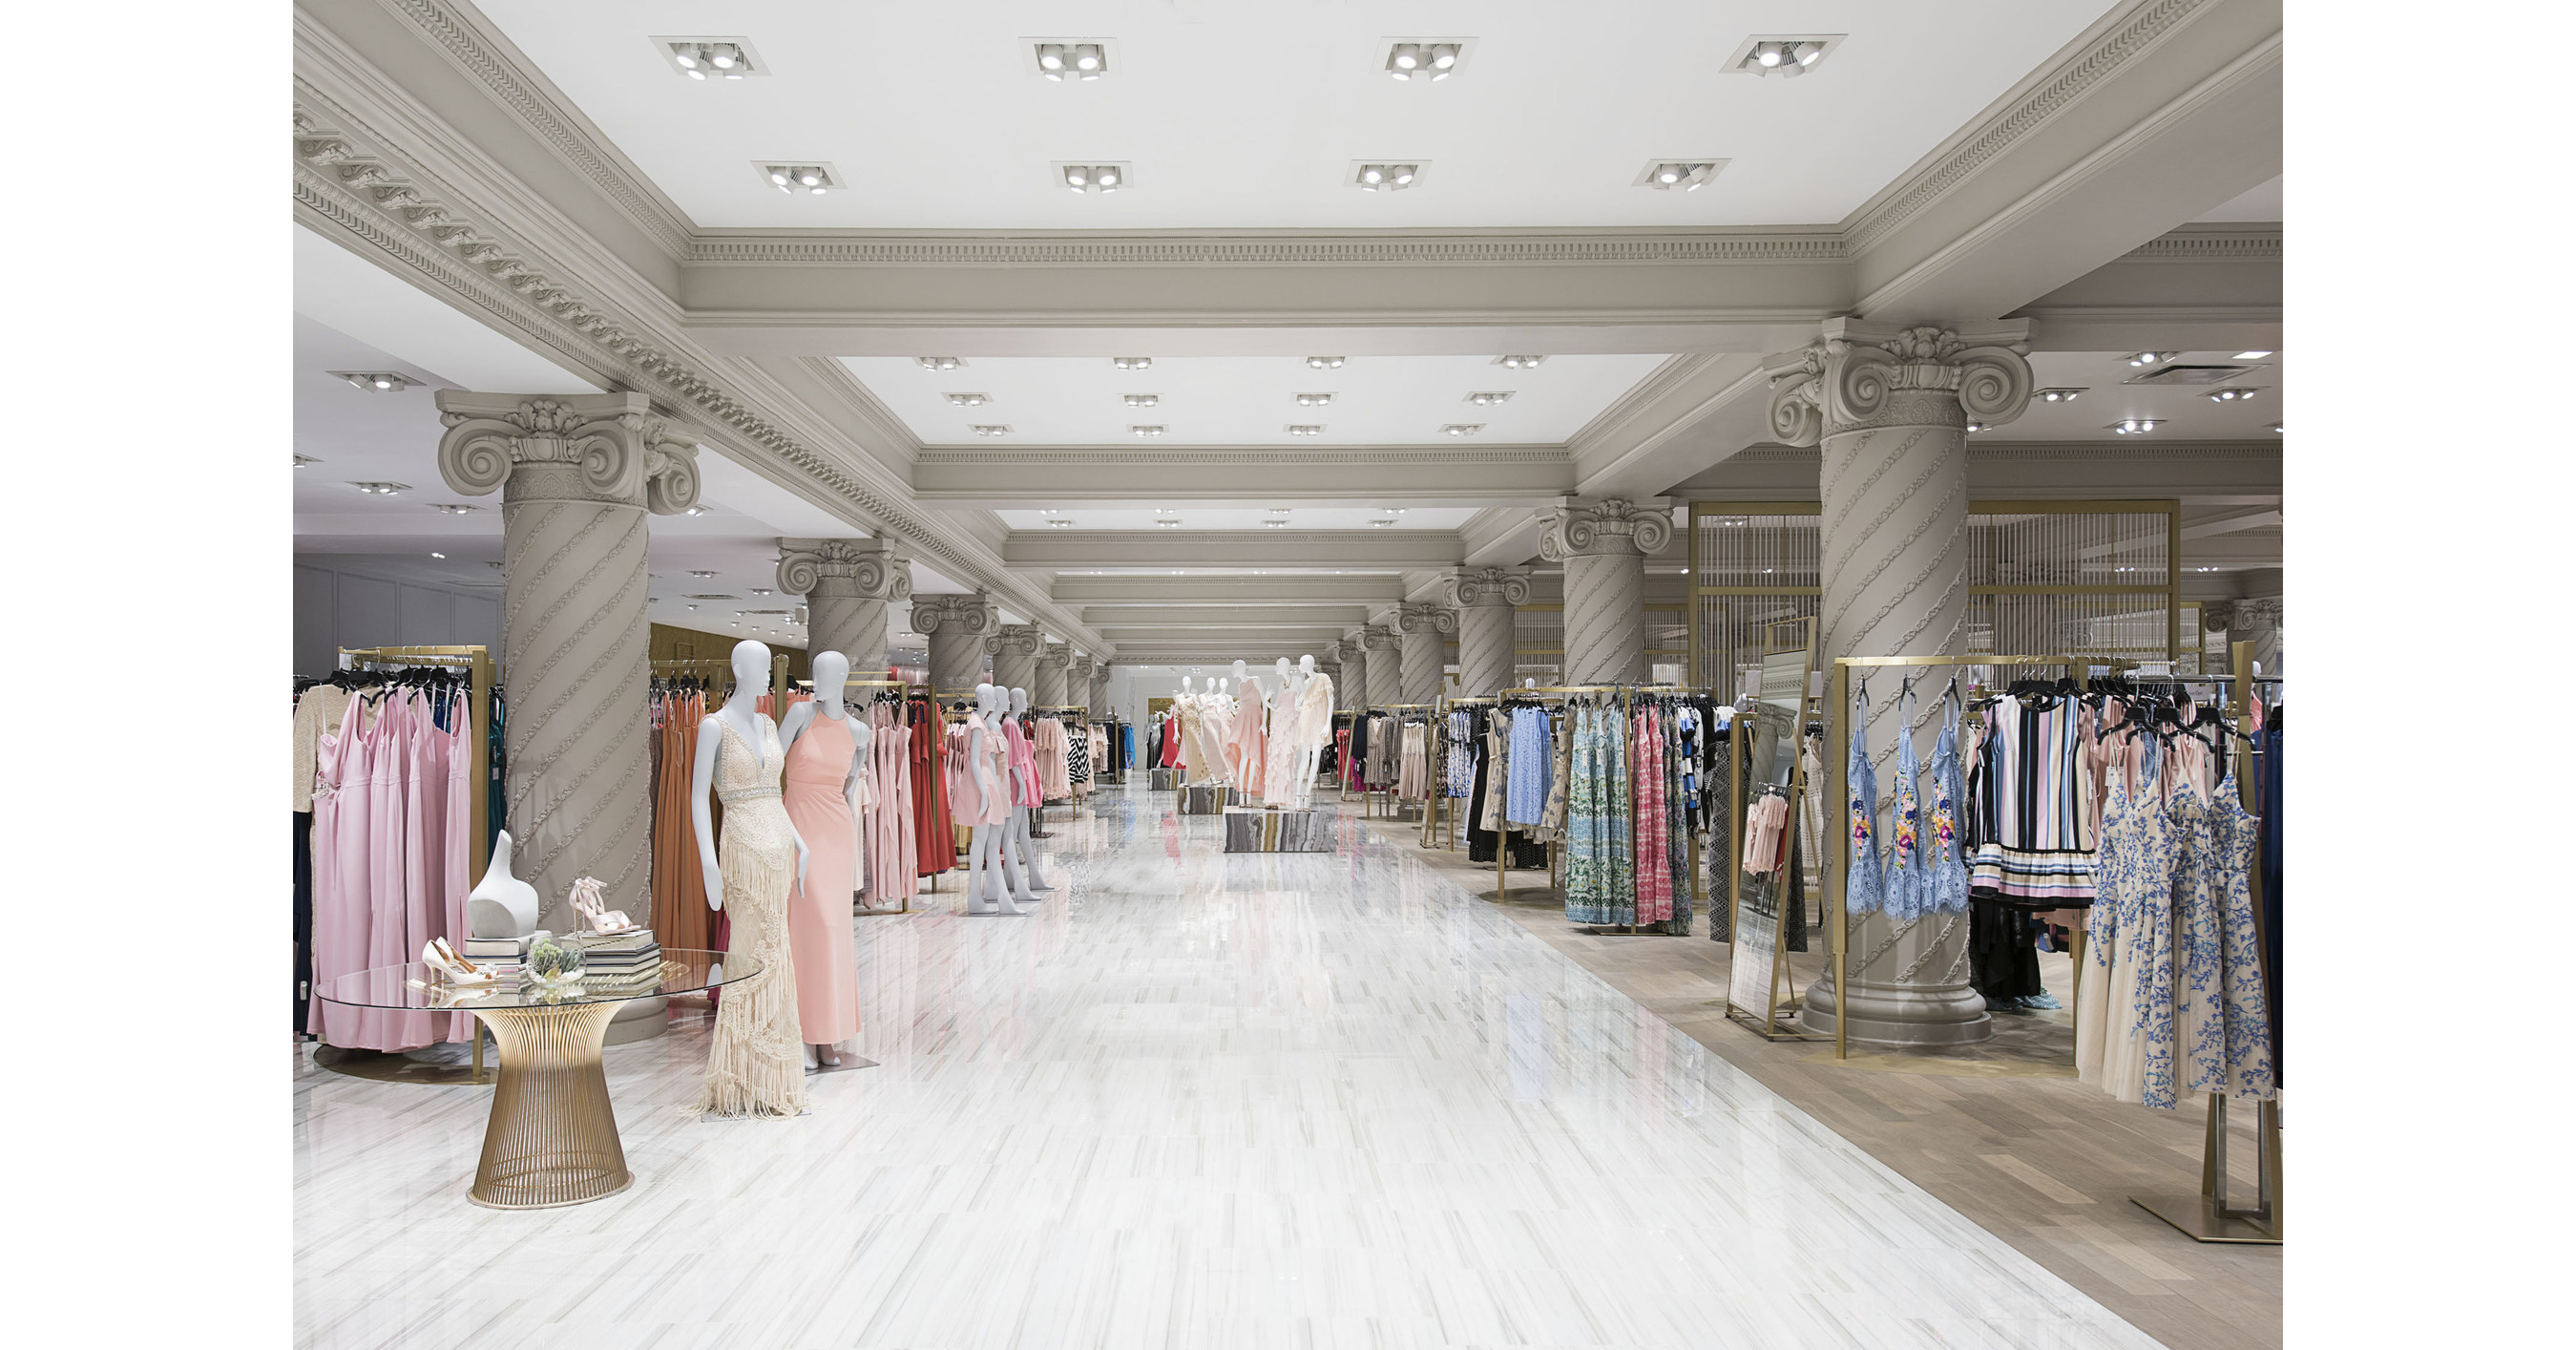 Lord & Taylor Presents a Dressed-up Flagship – WWD